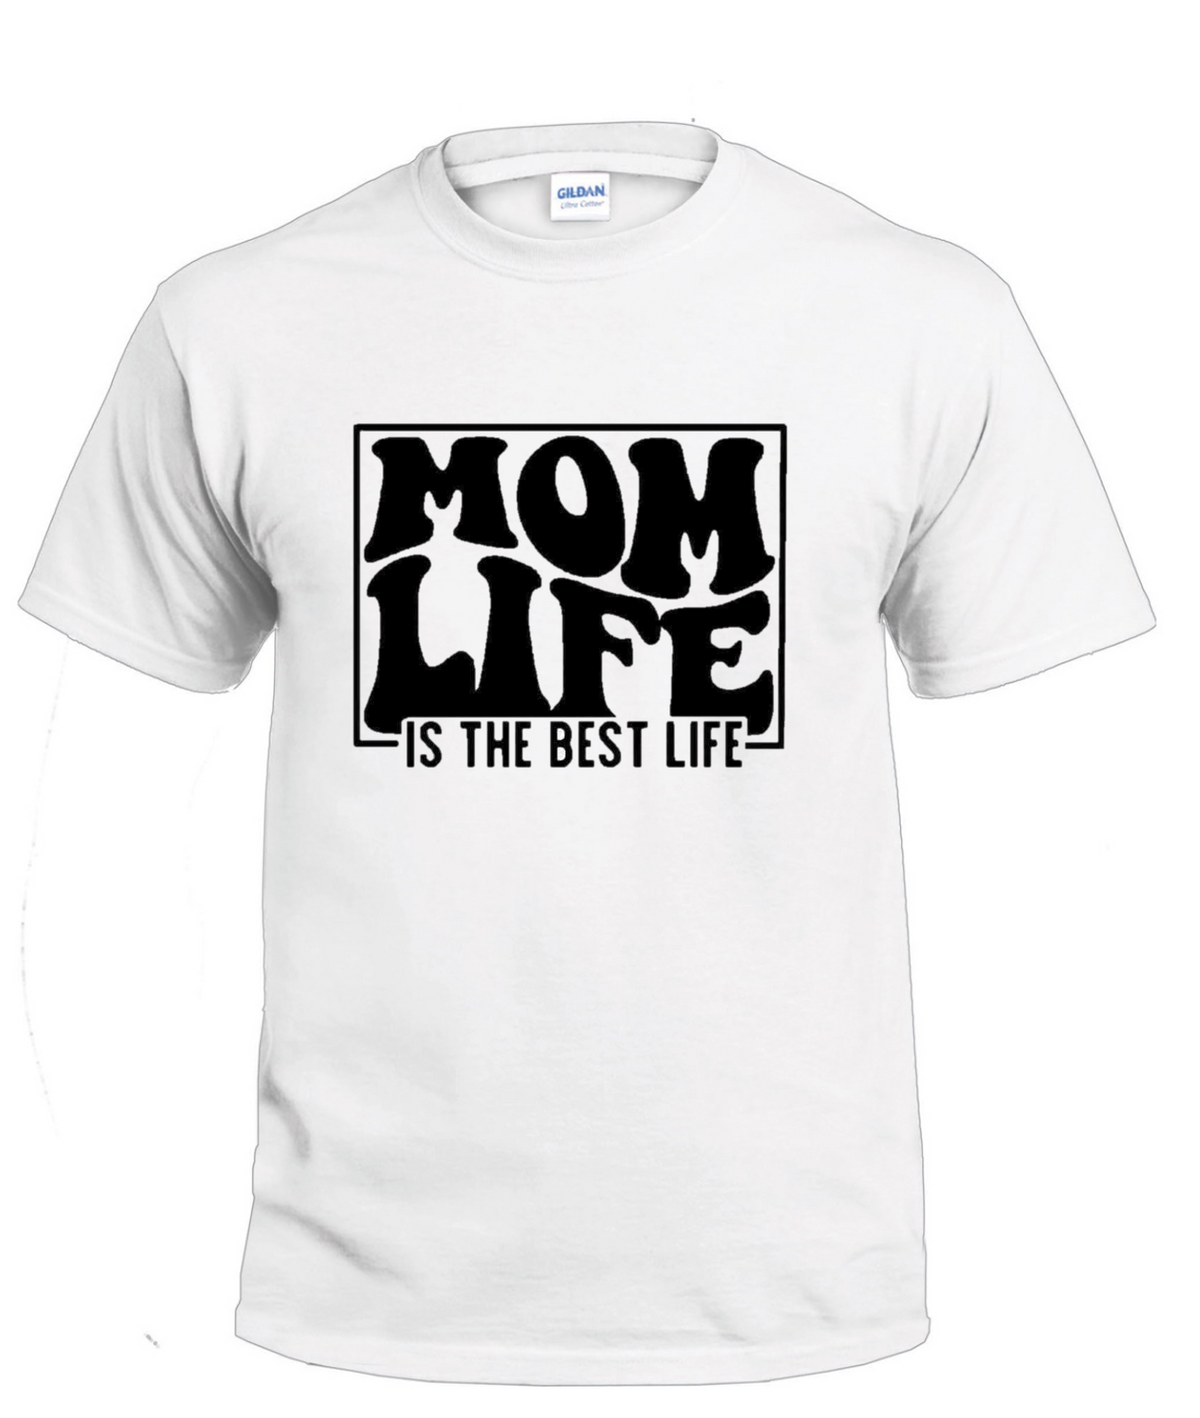 Mom Life Is the Best Life t-shirt